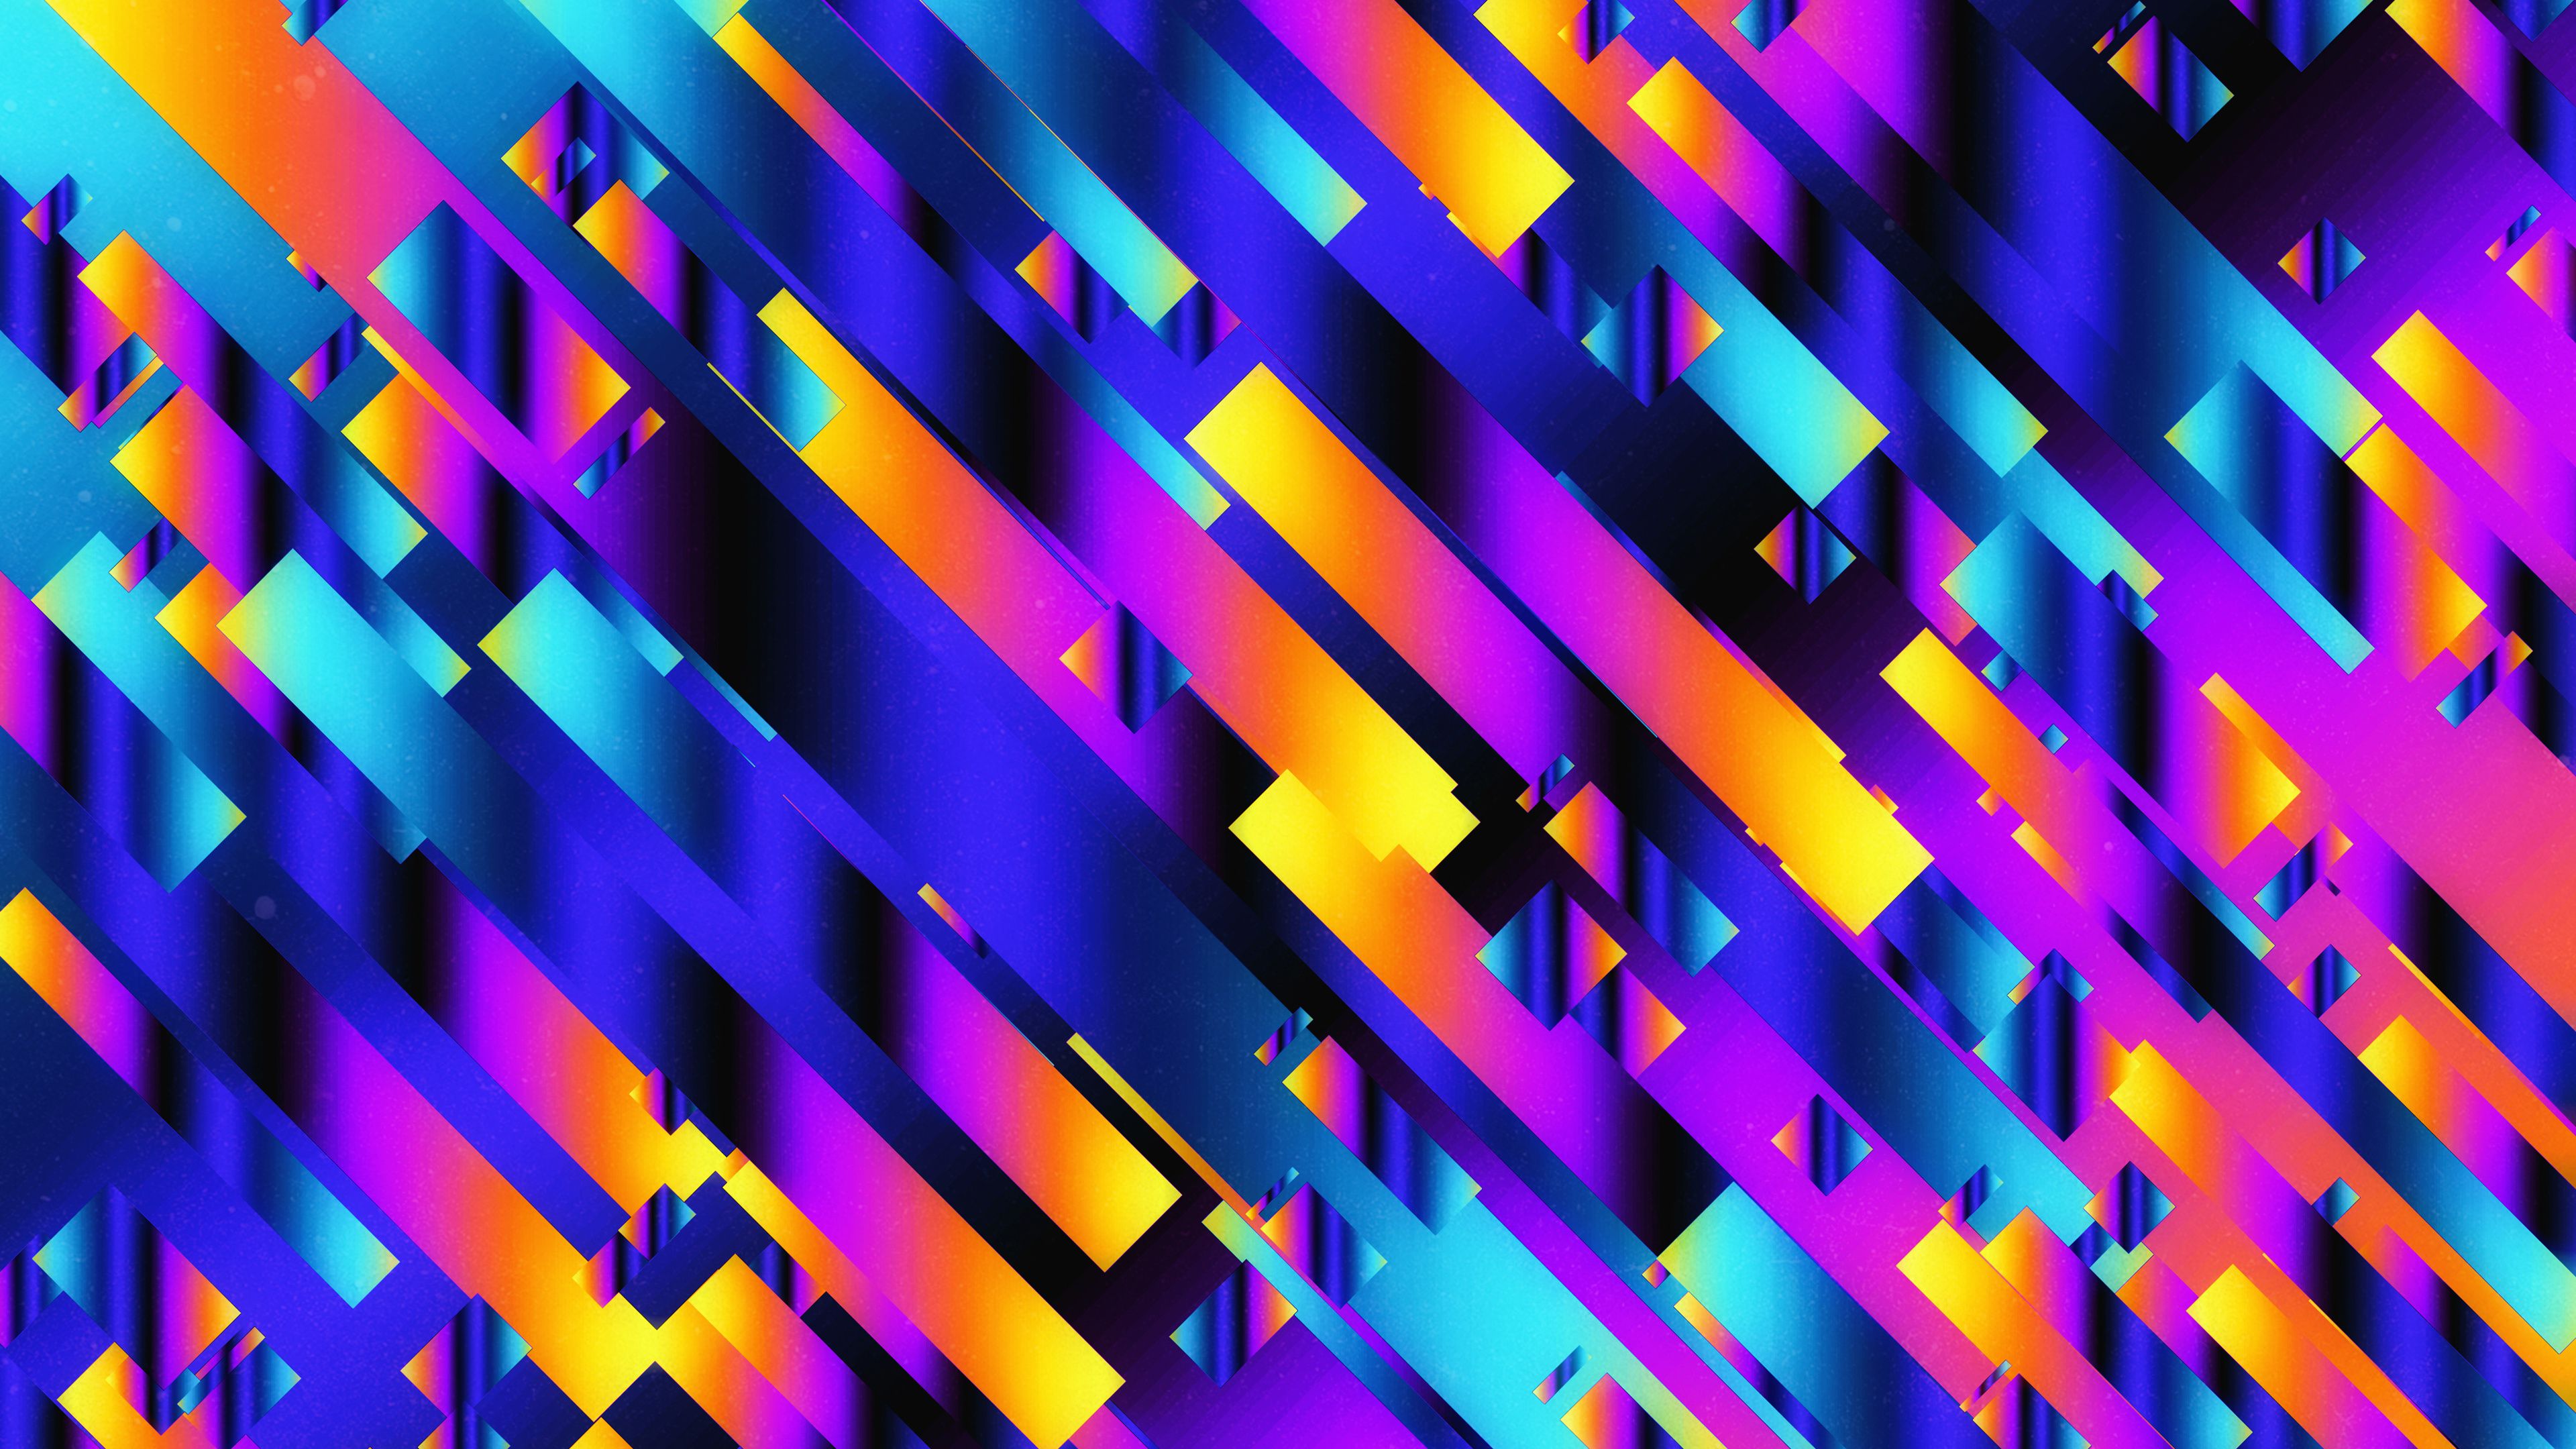 Download 3840x2160 wallpaper abstract, neon pattern, ribbons, 4k